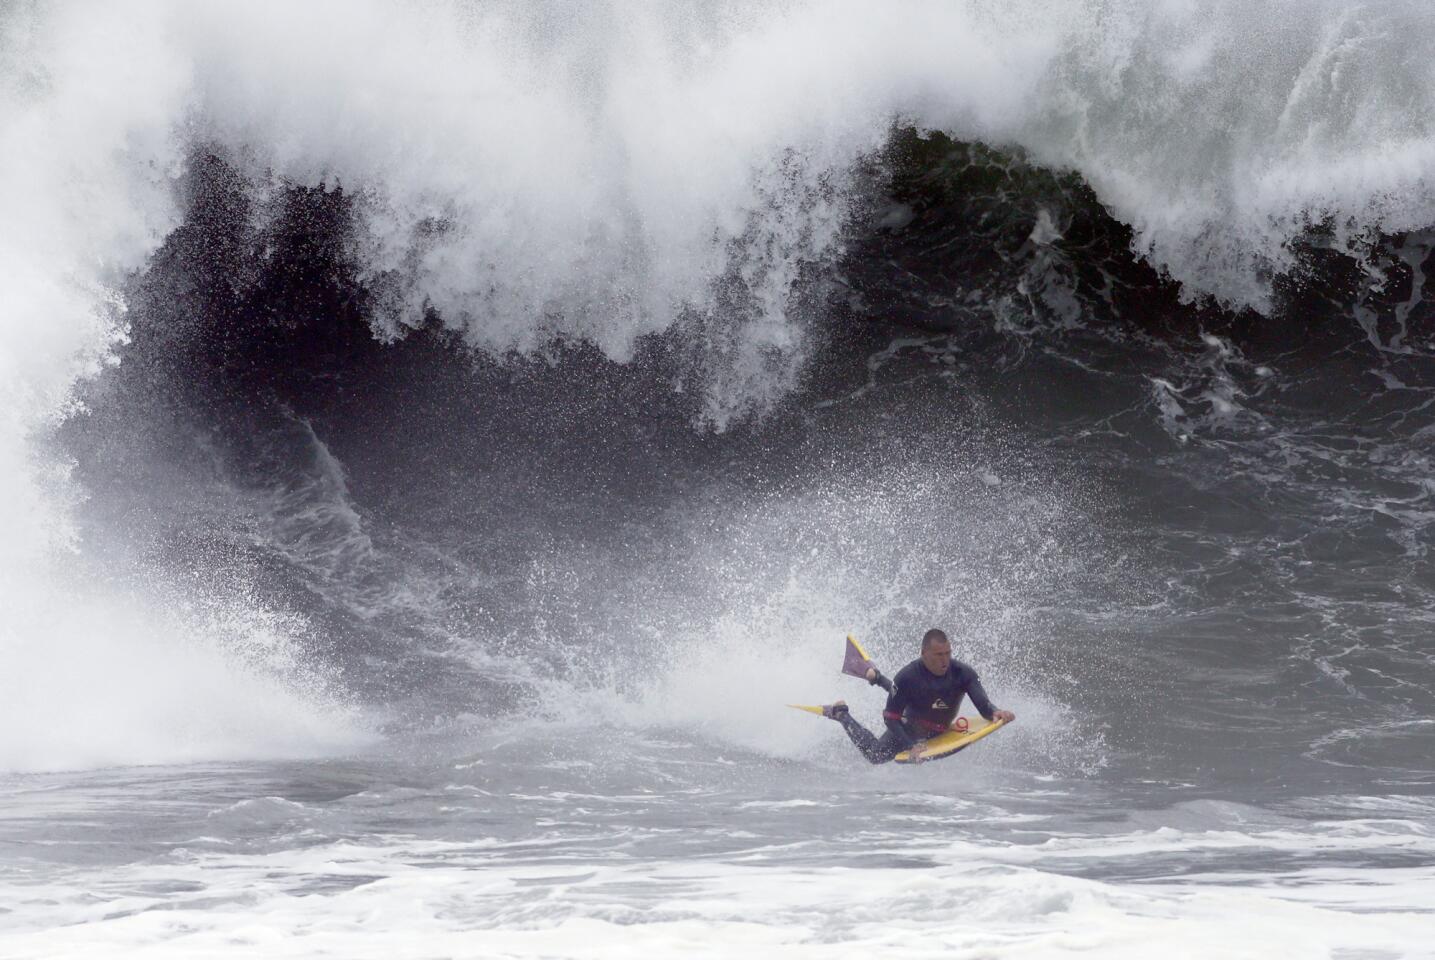 PHOTOS: Wedge got wild this week with big swell – Orange County Register